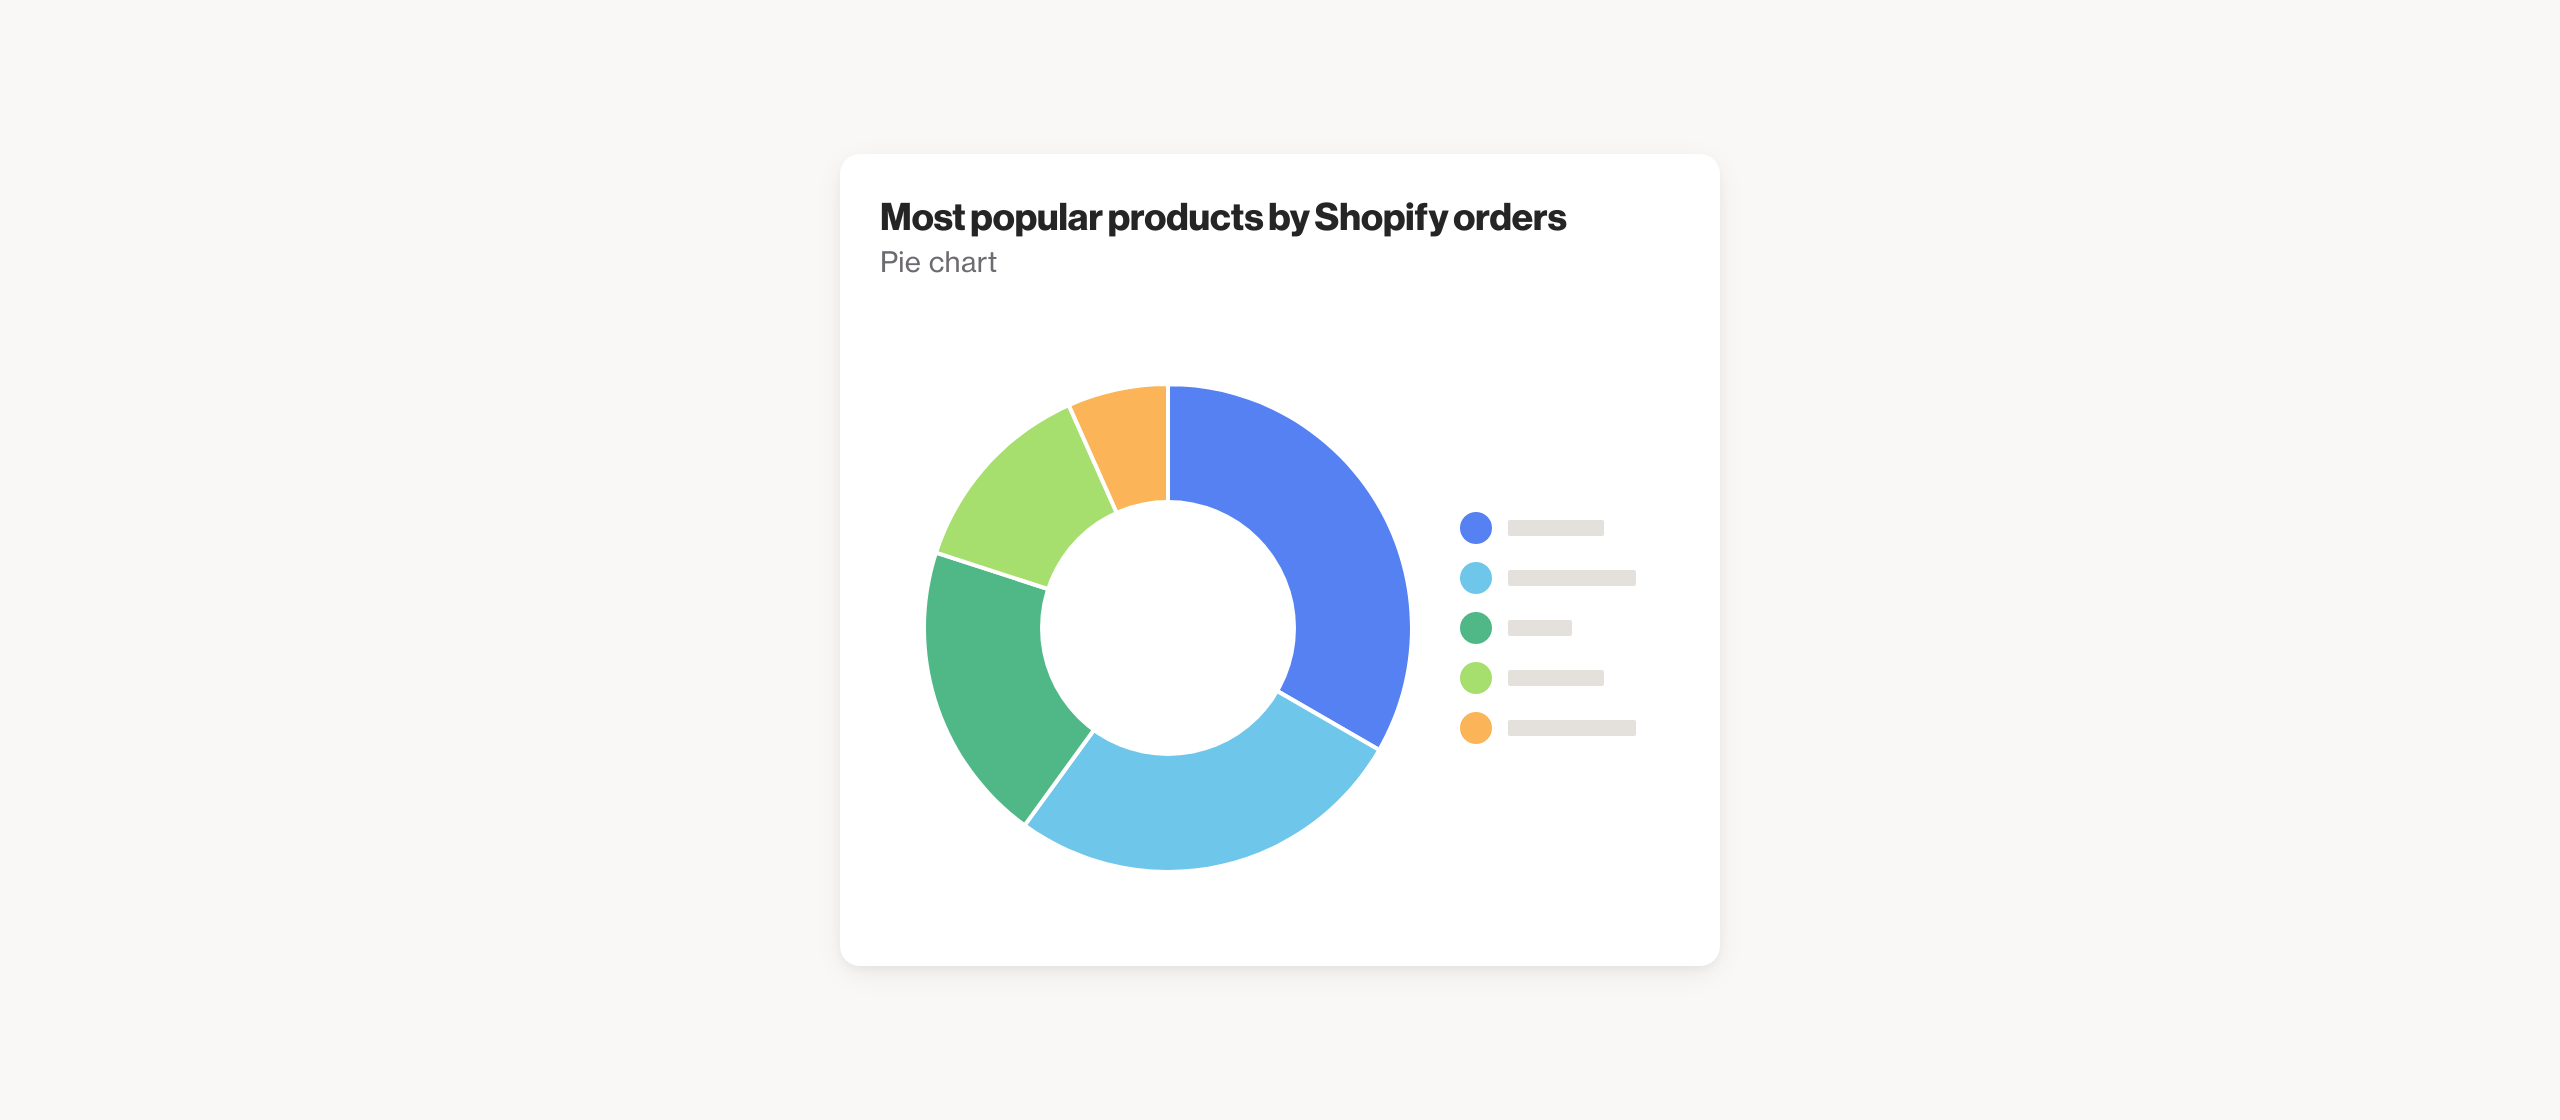 Top Shopify products by orders